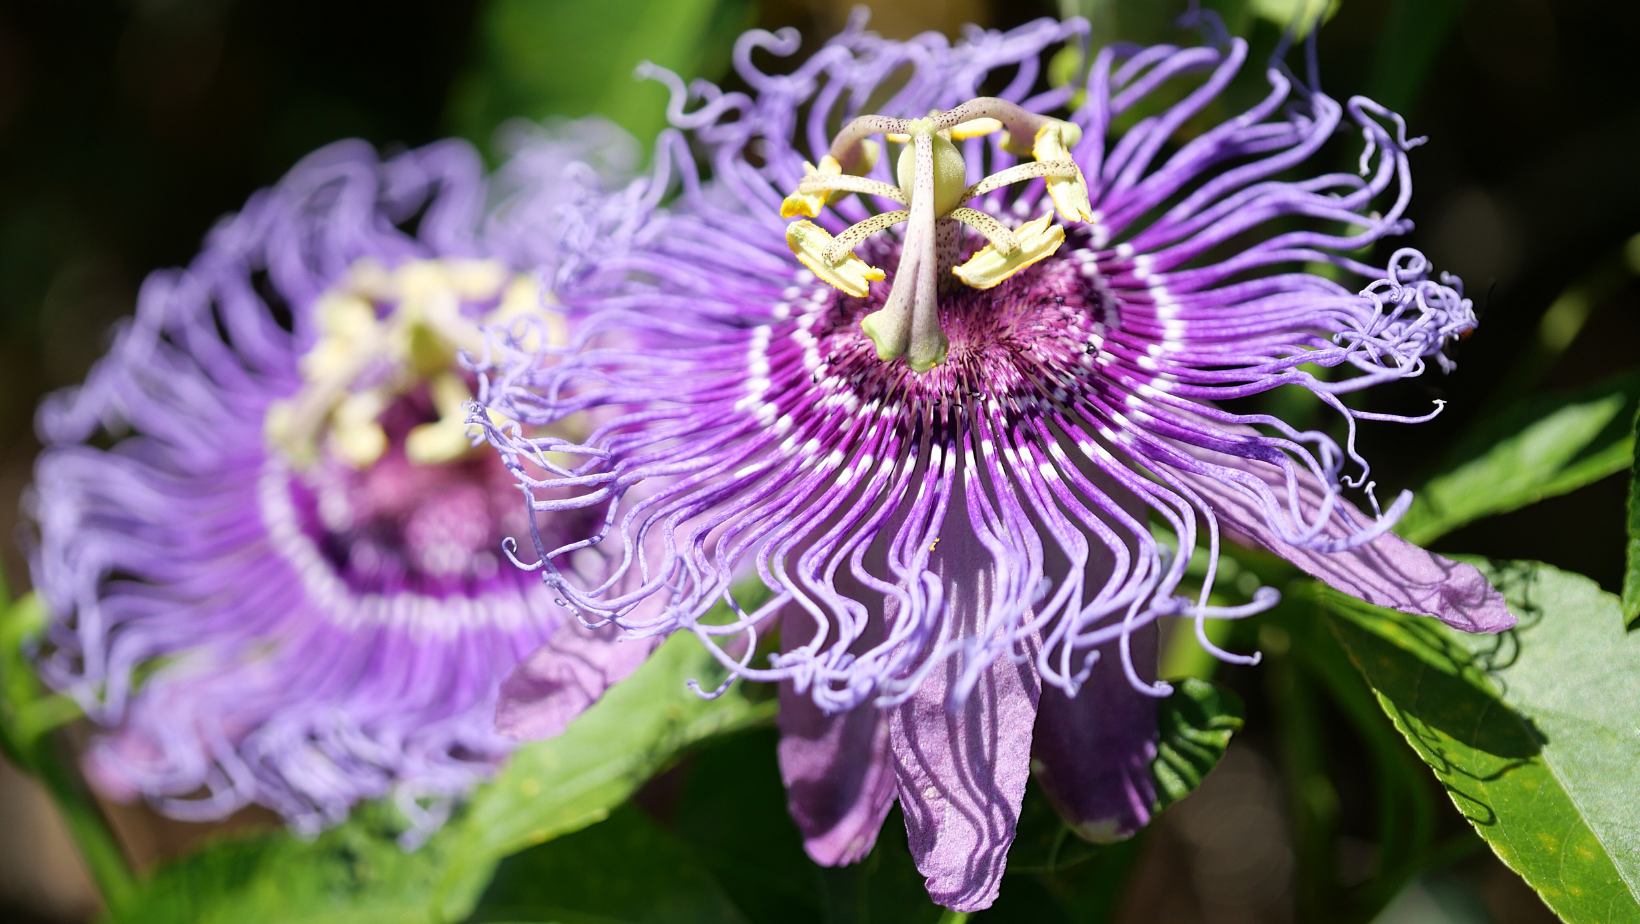 The healing benefits of passion flower